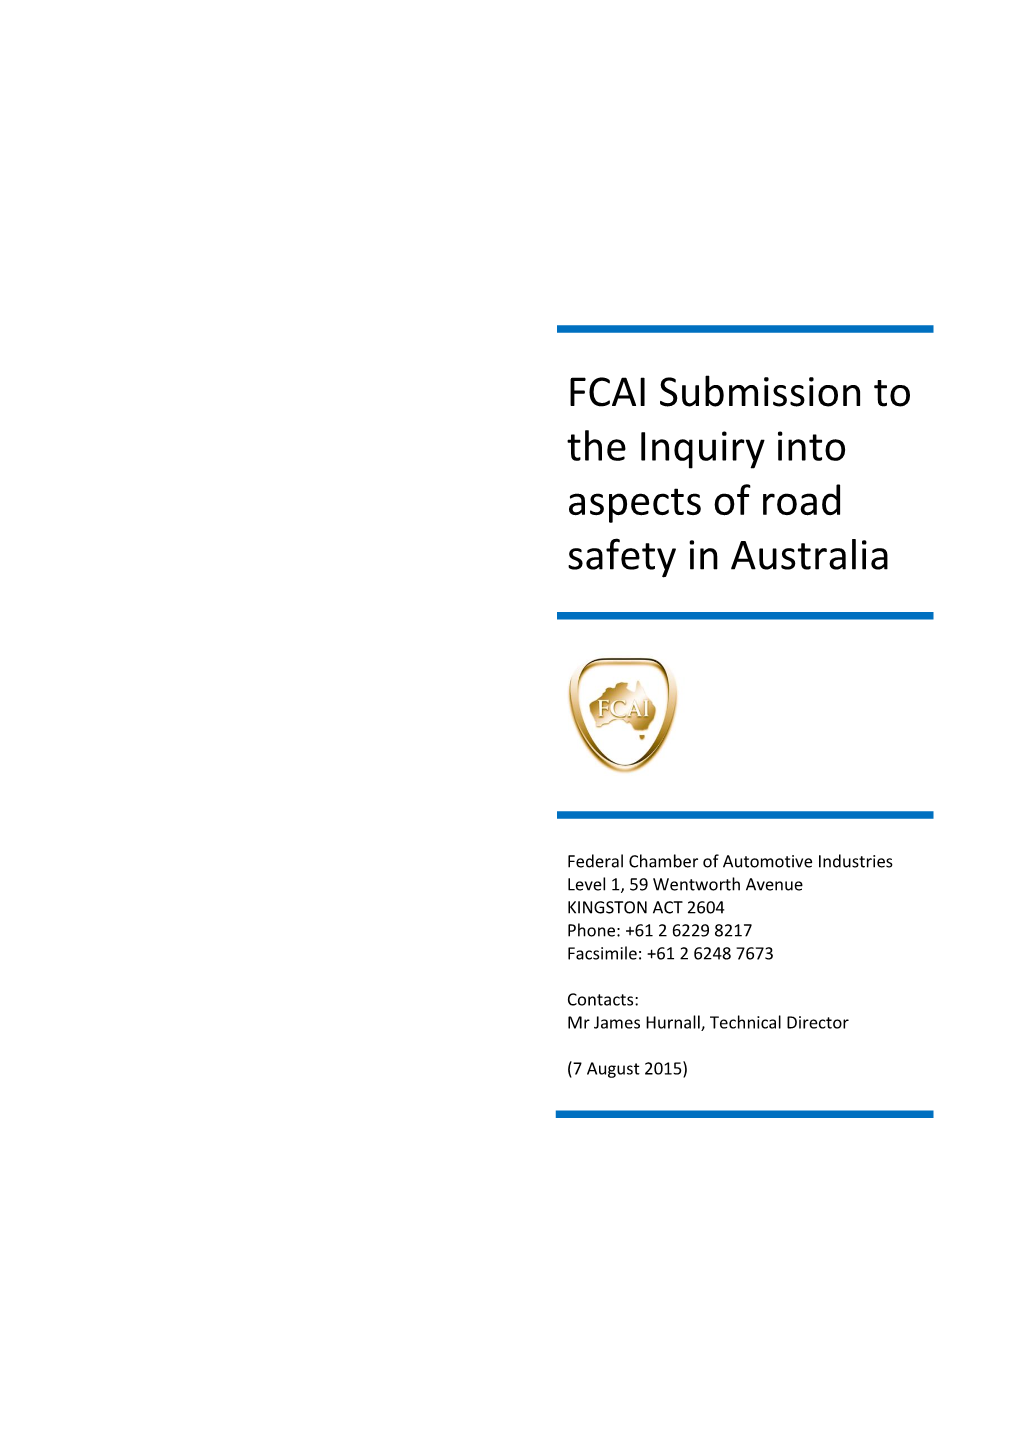 FCAI Submission to the Inquiry Into Aspects of Road Safety in Australia